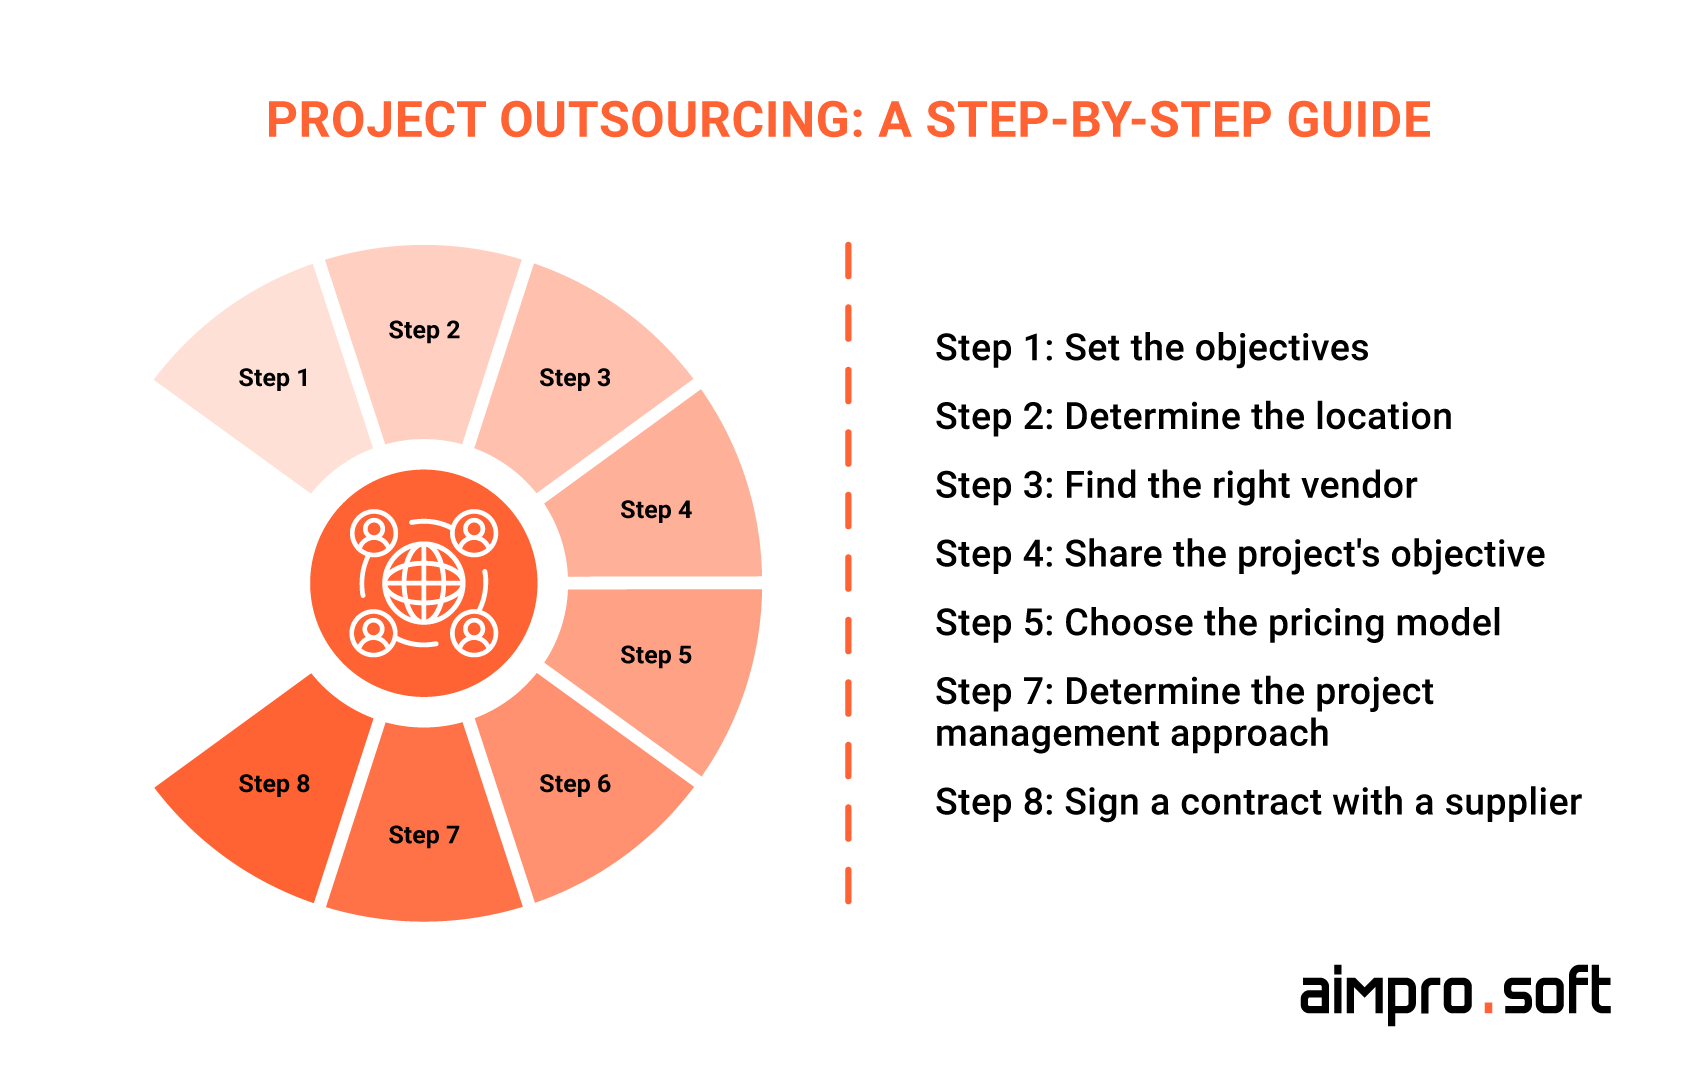 A step-by-step guide to project outsourcing